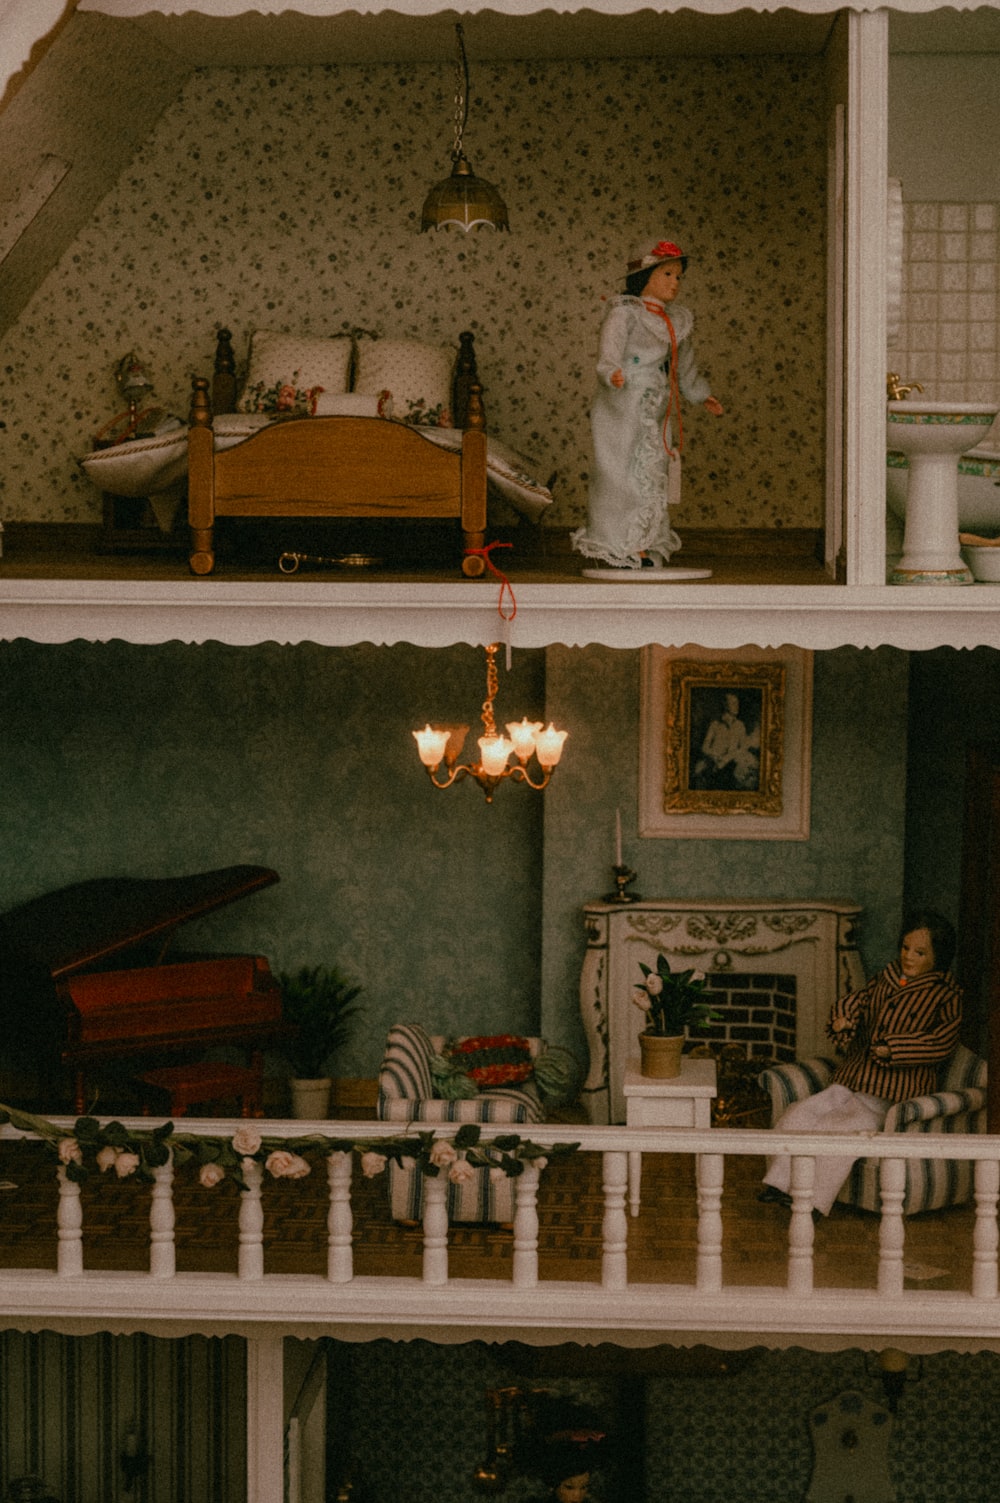 a doll house with a doll standing on top of it